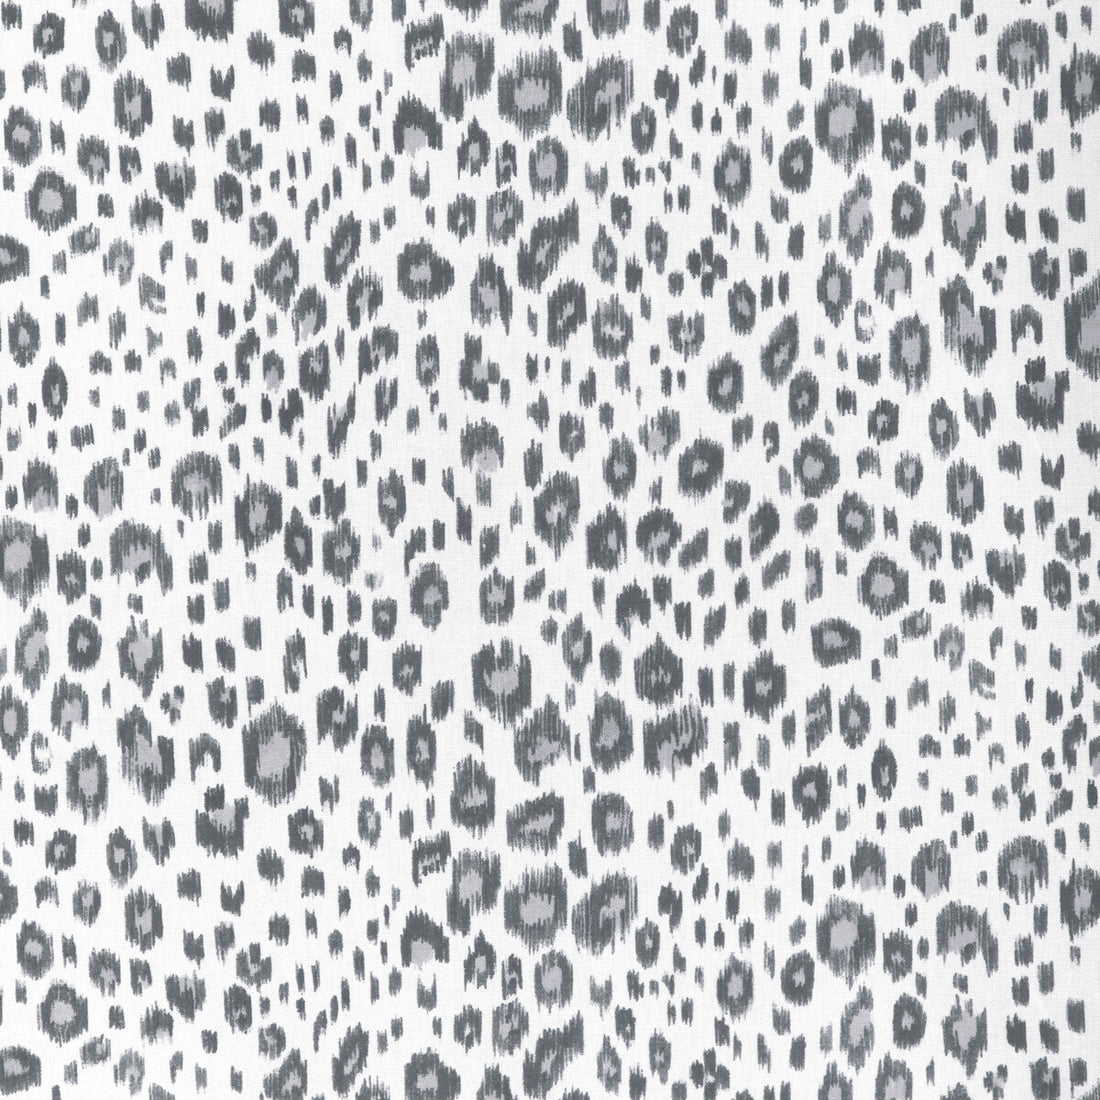 Leopardos fabric in nickel color - pattern LEOPARDOS.1101.0 - by Kravet Basics in the Small Scale Prints collection